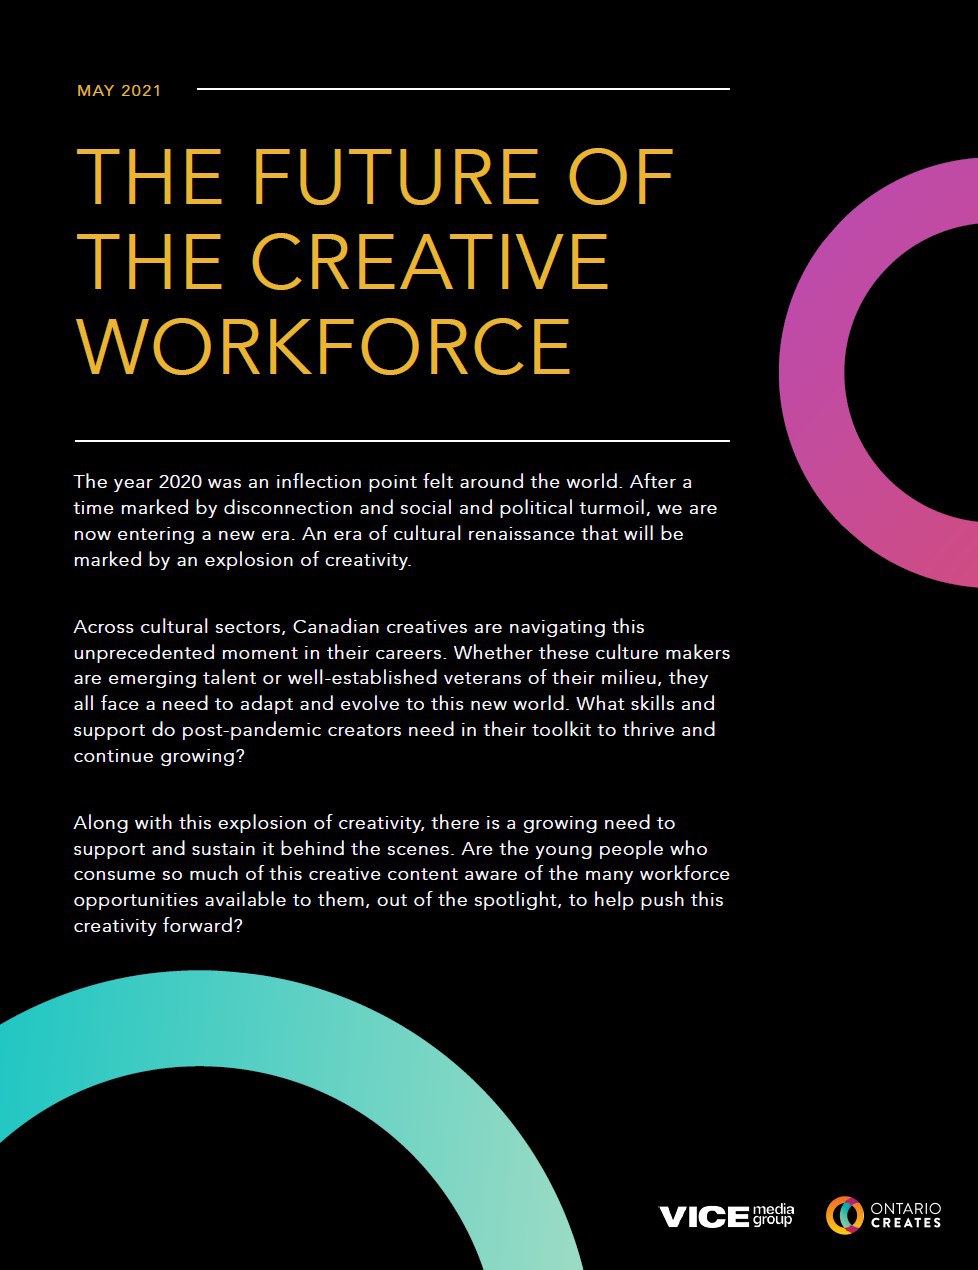 The Future of the Creative Workforce